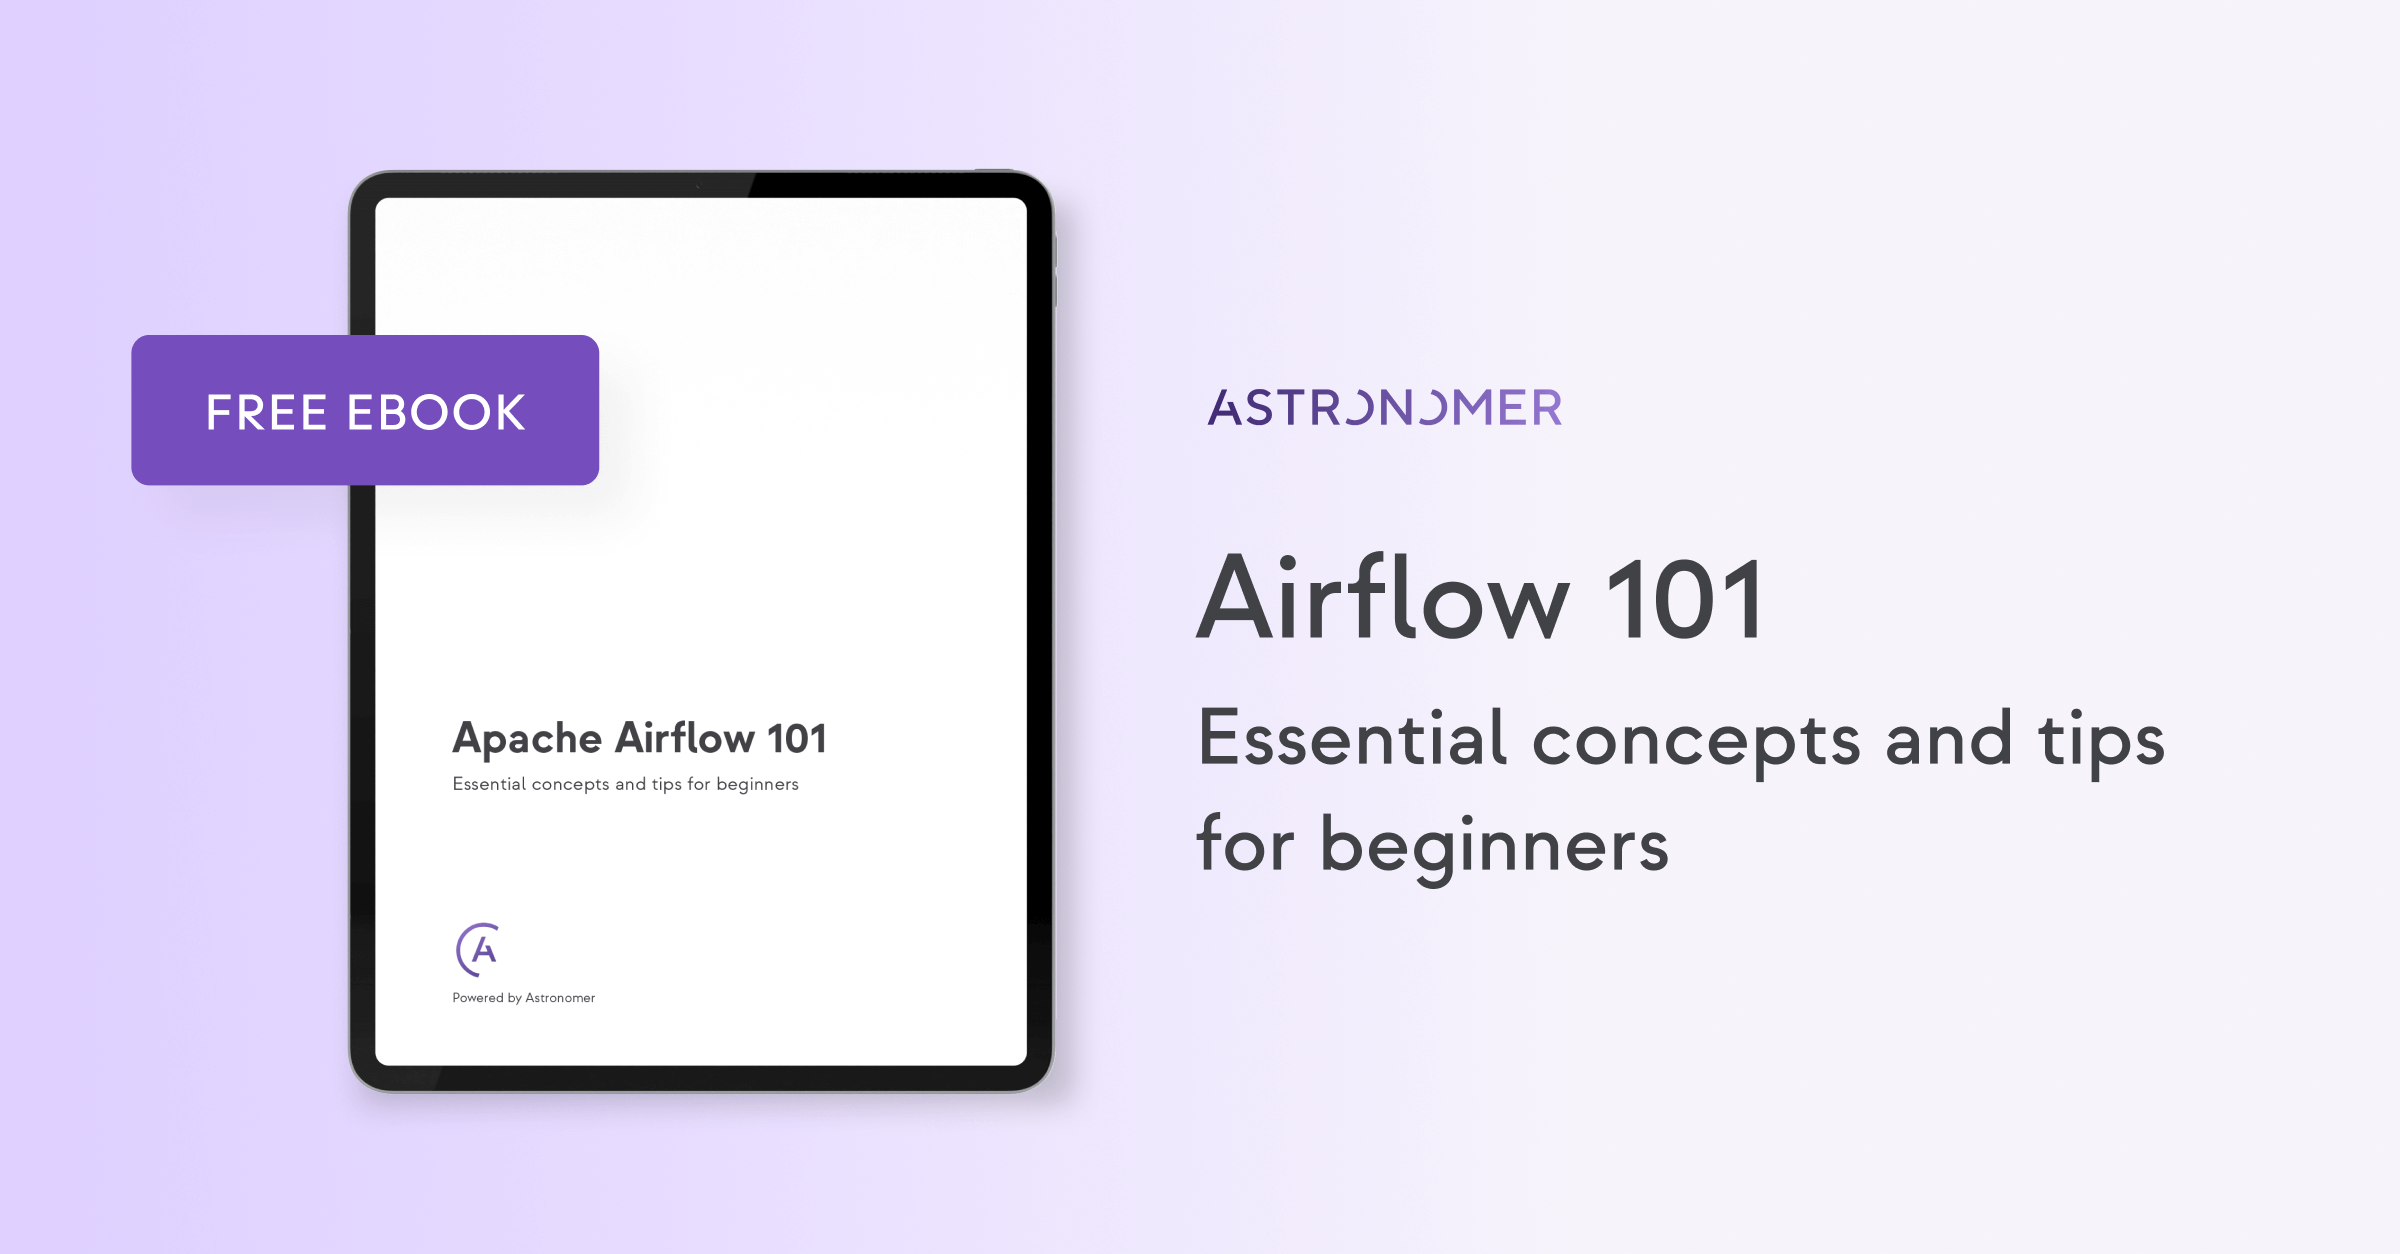 Apache Airflow 101 Essential Tips for Beginners